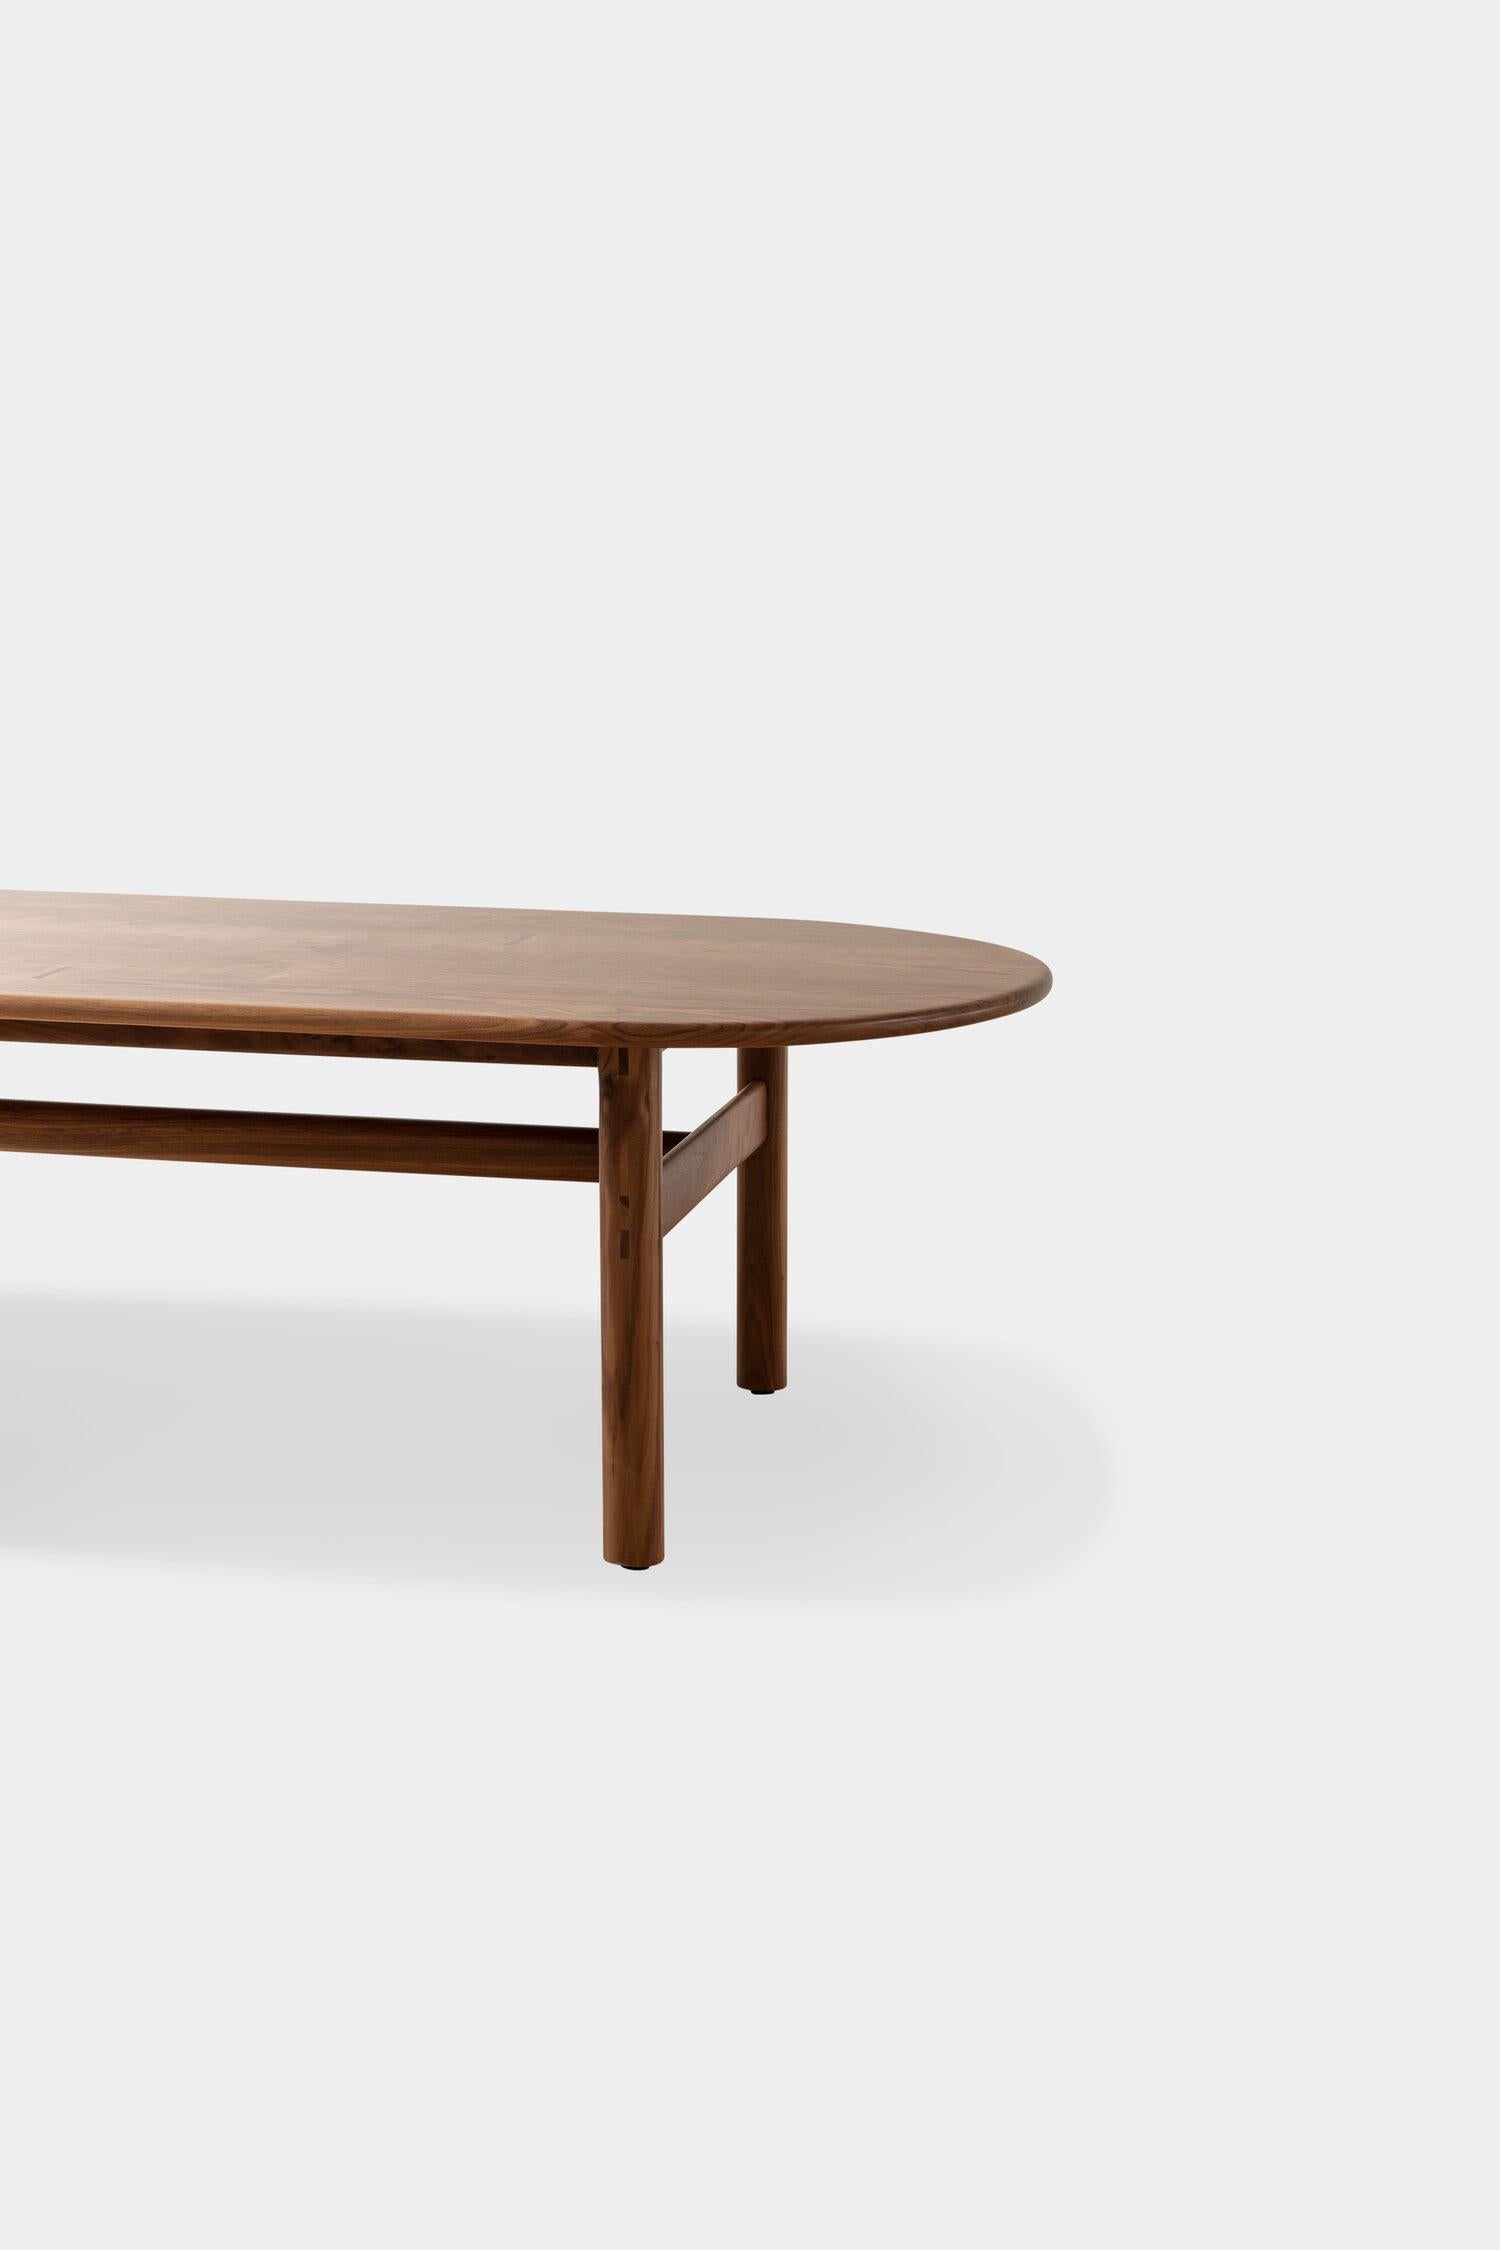 Polished EARL Walnut Pill top bullnose edge Palang Dining Table For Sale